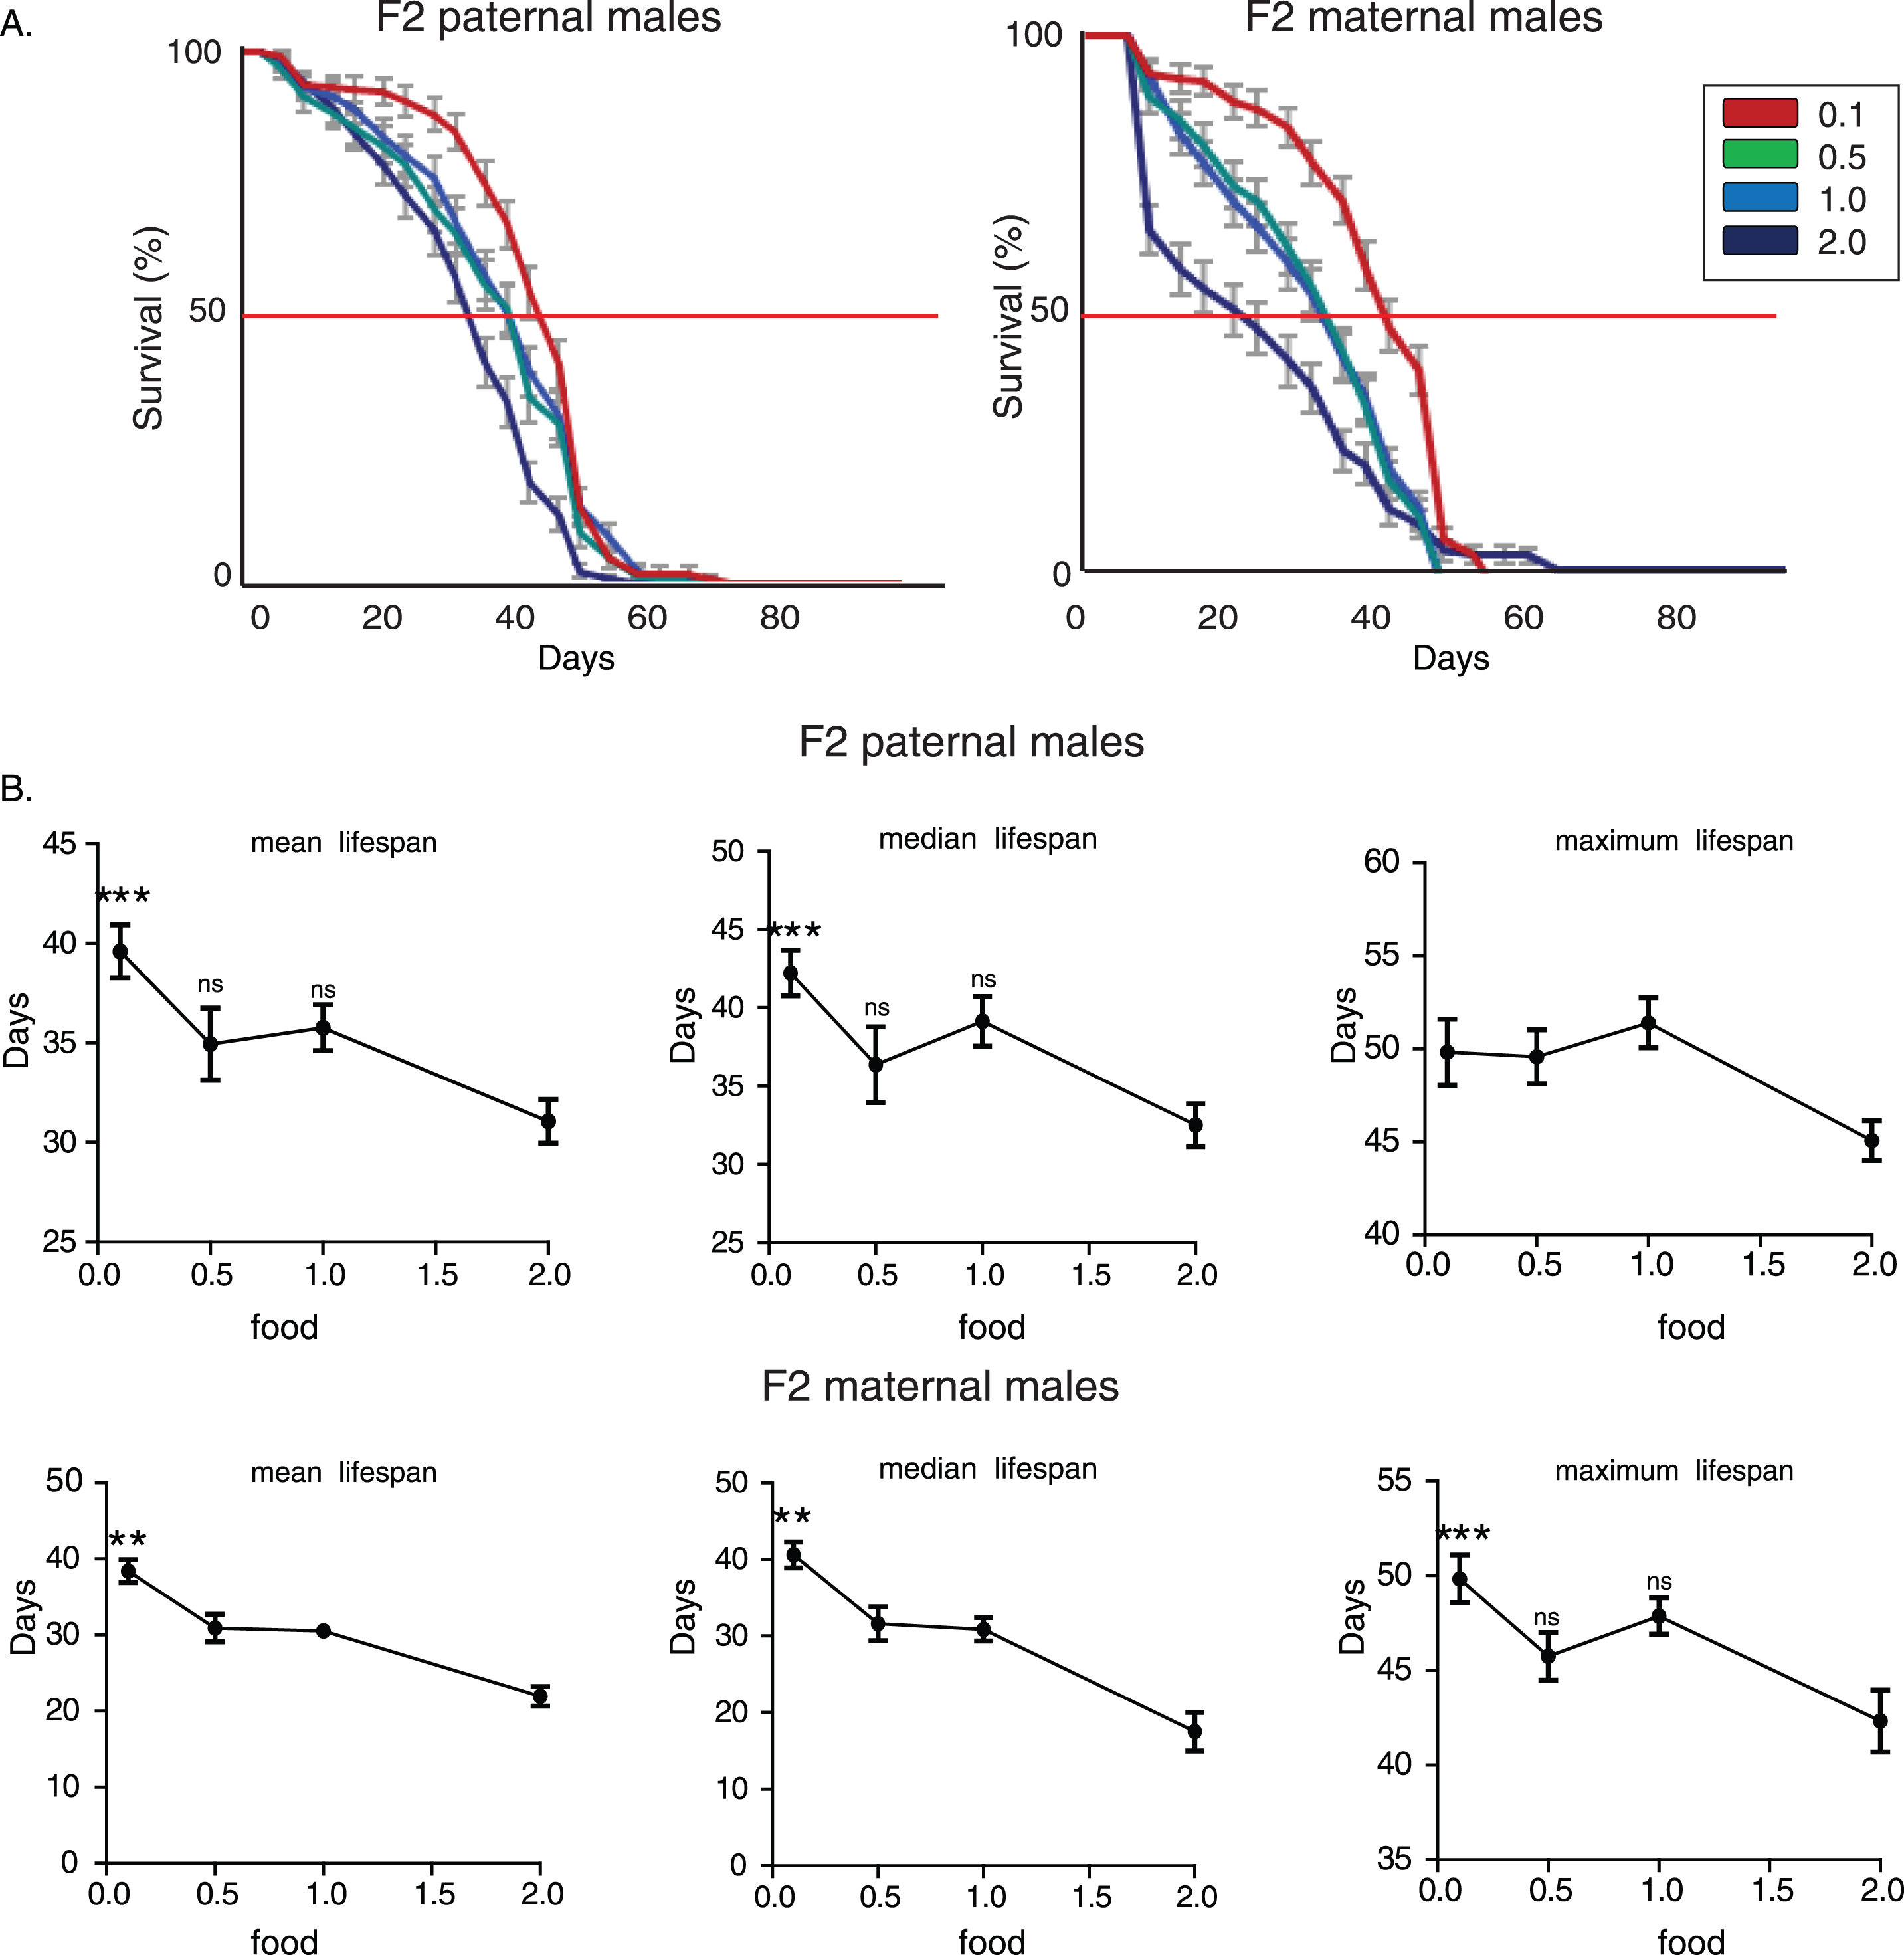 Starvation-induced transgenerational effect on longevity is evolutionarily conserved in Drosophila melanogaster. A) Lifespan curves of F2 males (CS strain) from paternal and maternal grandfathers exposed to different dietary conditions. F2 virgin males whose paternal grandfathers had experienced starvation through larval stages (F2 paternal 0.1 males) were long-lived compared to the other groups. F2 (paternal) 0.1 vs. 0.5: p < 1.2×10–4, F2 (paternal) 0.1 vs. 1.0: p < 0.014 and F2 (paternal) 0.1 vs. 2.0: p < 1.7×10–21, log rank test. Also, F2 virgin males whose paternal grandfathers were fed under the richest conditions through larval stages (F2 paternal 2.0 males) were the shortest lived compared to the other groups. F2 (paternal) 2.0 vs. 1.0: p < 1.7×10–9, F2 (paternal) 2.0 vs. 0.5: p < 5.7×10–7, log rank test. F2 virgin males whose maternal grandfathers had experienced starvation through larval stages (F2 maternal 0.1 males) were also long-lived compared to the other groups. F2 (maternal) 0.1 vs. 0.5: p < 7×10–14, F2 (maternal) 0.1 vs. 1.0: p < 1.6×10–14 and F2 (paternal) 0.1 vs. 2.0: p < 1×10–40, log rank test. On the contrary, the richest conditions of larval feeding (F2 maternal 2.0 males) led to significant lifespan reduction. F2 (paternal) 2.0 vs. 1.0: p < 1.3×10–11, F2 (paternal) 2.0 vs. 0.5: p < 7×10–12, log rank test. Lifespan data shown are from a single trial. For each lifespan experiment n > 260. Error bars indicate SEM. B) Mean, median and maximum lifespan of F2 males from paternal and maternal grandfathers exposed to different dietary conditions. Grandparents’ feeding affected mean, median but not maximum lifespan in F2 paternal flies (the mean lifespan of the longest-lived 10% of flies); F2 (paternal) 0.1 vs. 2.0: p < 0.001, q = 4,404 and p < 0.001, q = 3.912, for mean and median lifespan respectively. Ancestor’s feeding affected more pronouncedly lifespan values in maternal grandsons (F2 maternal 0.1 vs. 0.5: p < 0.01, q = 3,739 and p < 0.01, q = 3,204 for mean and median lifespan respectively, F2 maternal 0.1 vs. 1.0: p < 0.001, q = 3,929 and p < 0.01, q = 3,465 for mean and median lifespan respectively, F2 maternal 0.1 vs. 2.0: p < 0.001, q = 8,067, p < 0.001, q = 8.081 and p < 0.001, q = 4.100 for mean, median and maximum lifespan. One-way ANOVA with Dunnett’s multiple comparison against F2 0.1 flies. For each lifespan experiment n > 13, **p < 0.01, ***p < 0.001. Error bars indicate SEM.